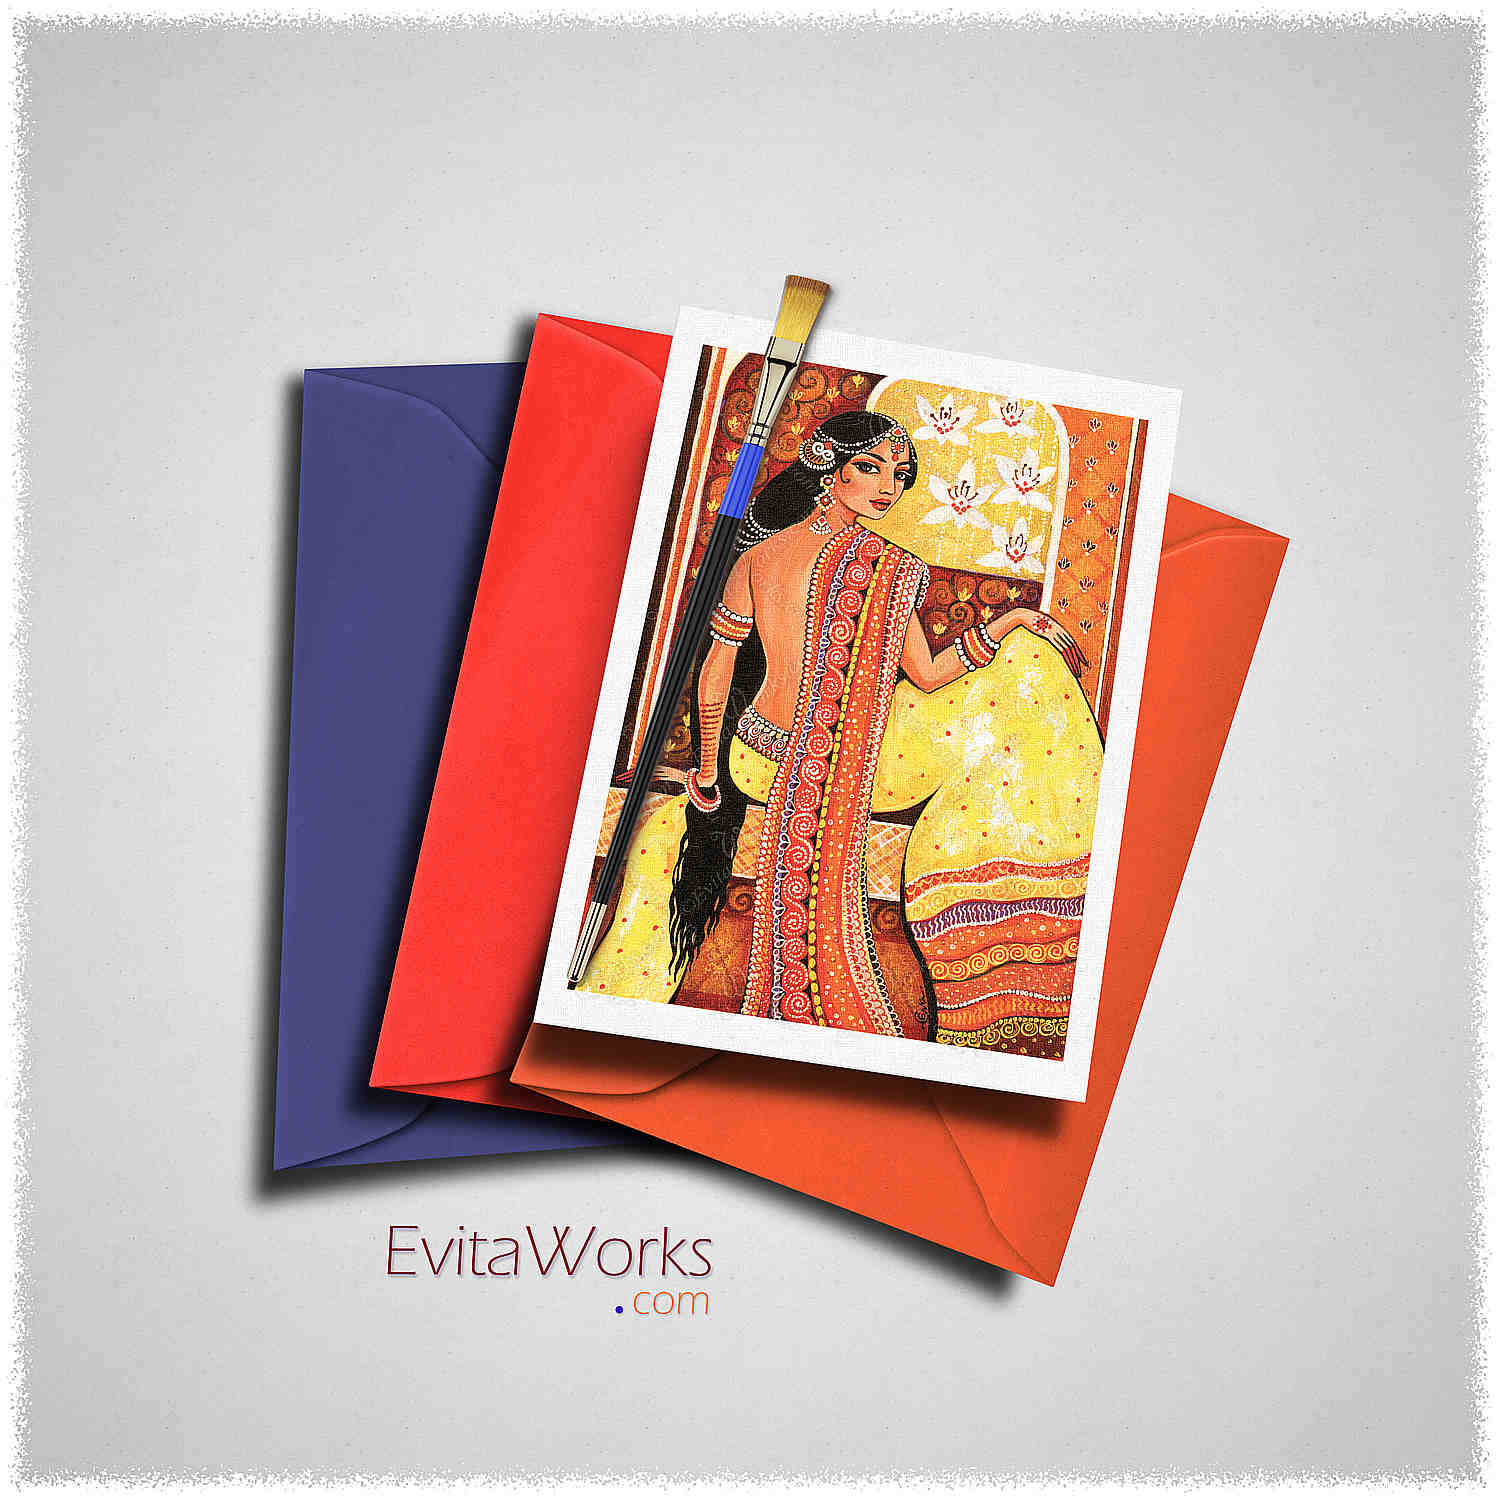 Hit to learn about "Bharat, Indian woman art" on cards